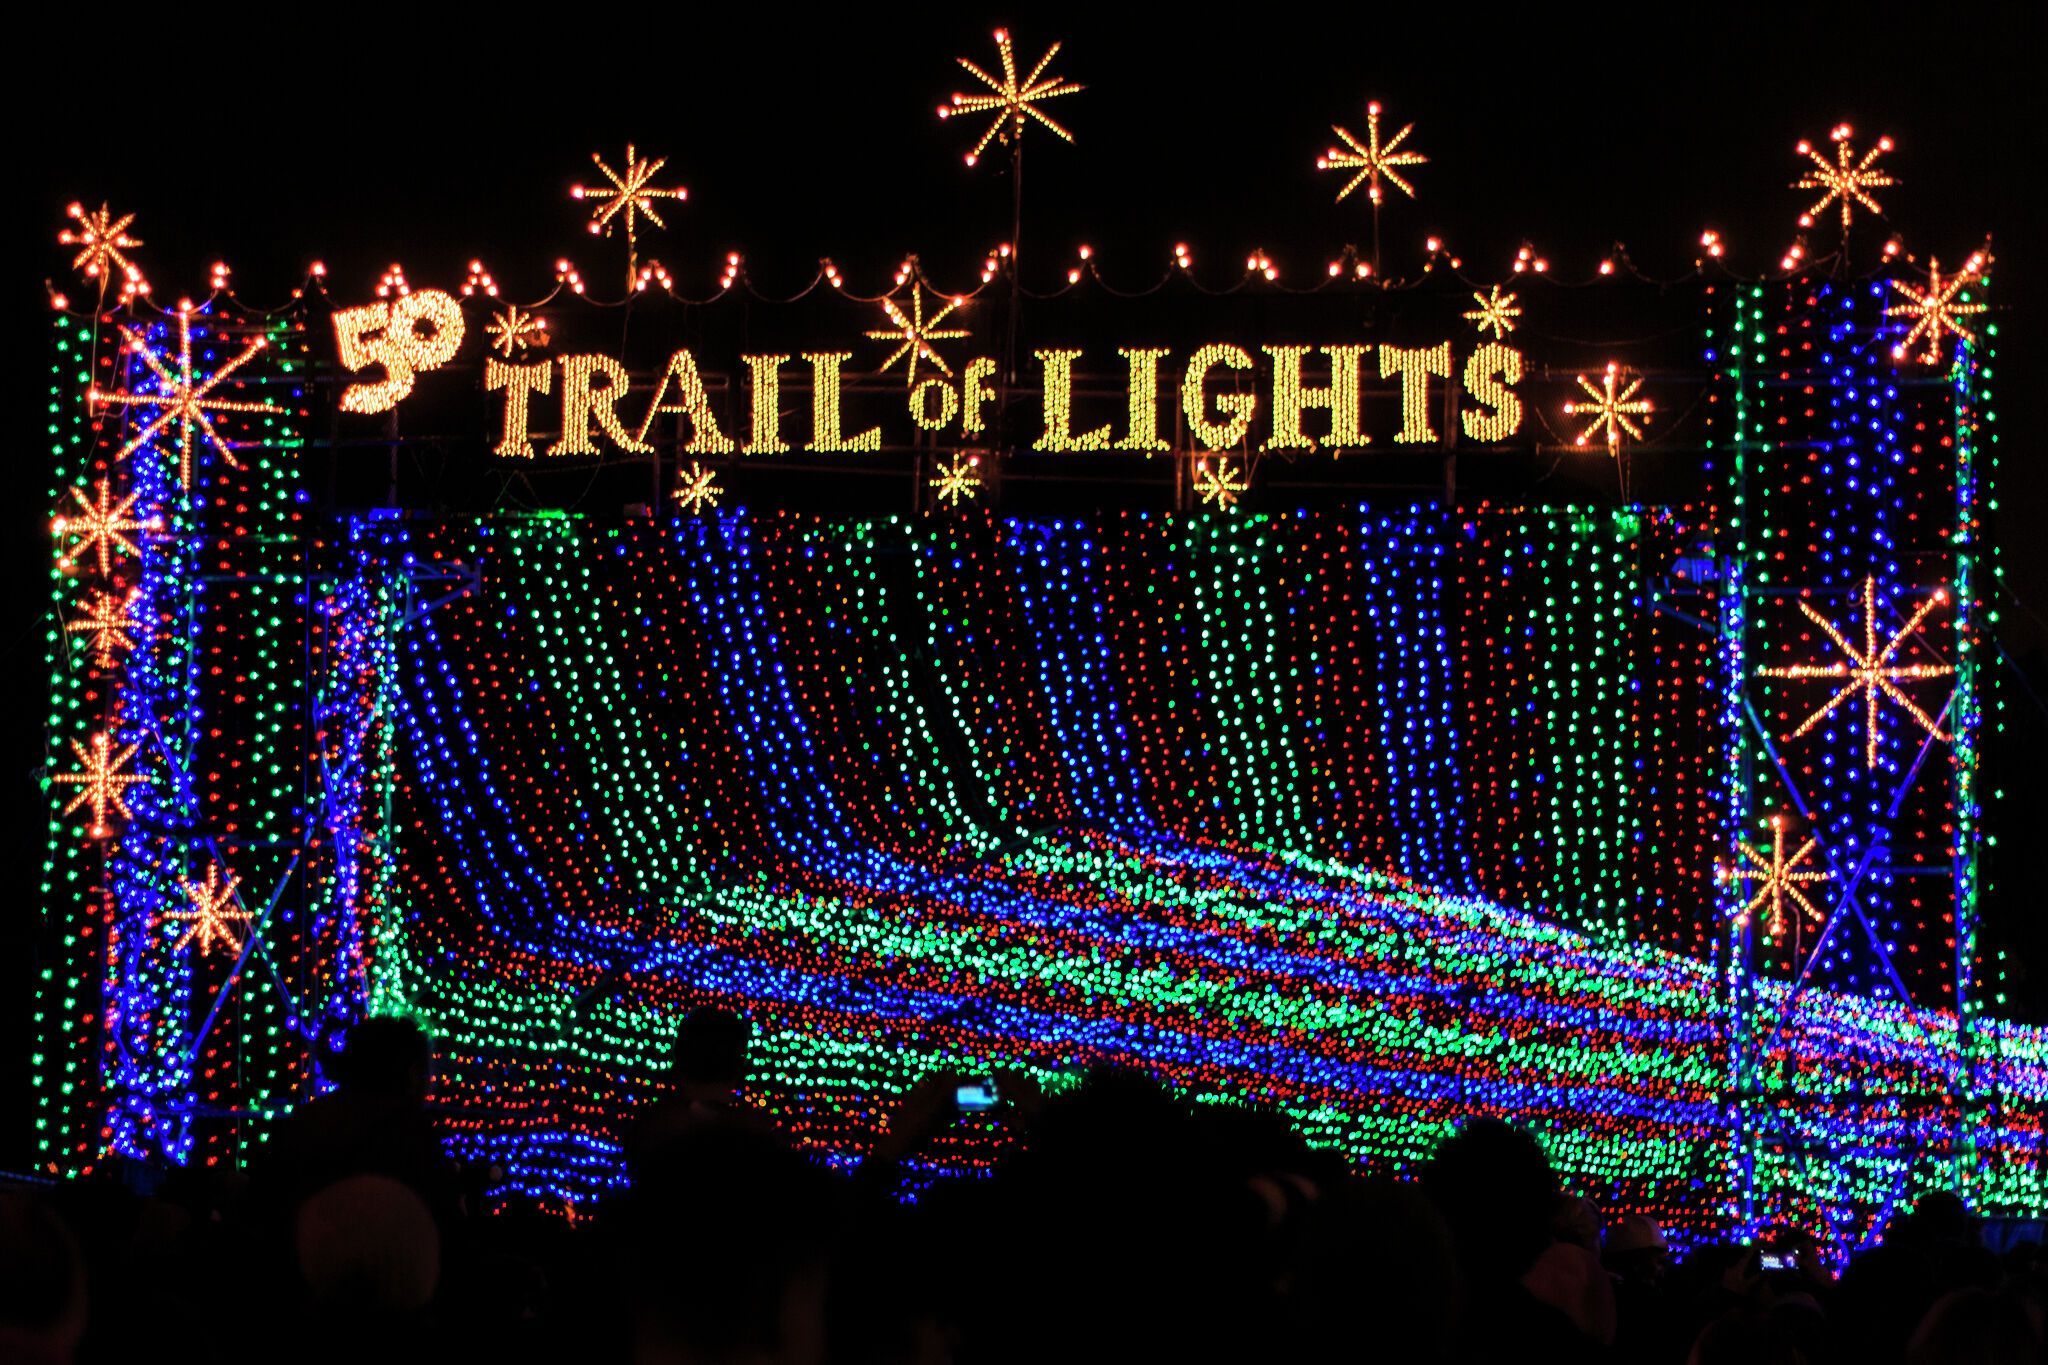 59th annual Austin Trail of Lights to kick off holiday season